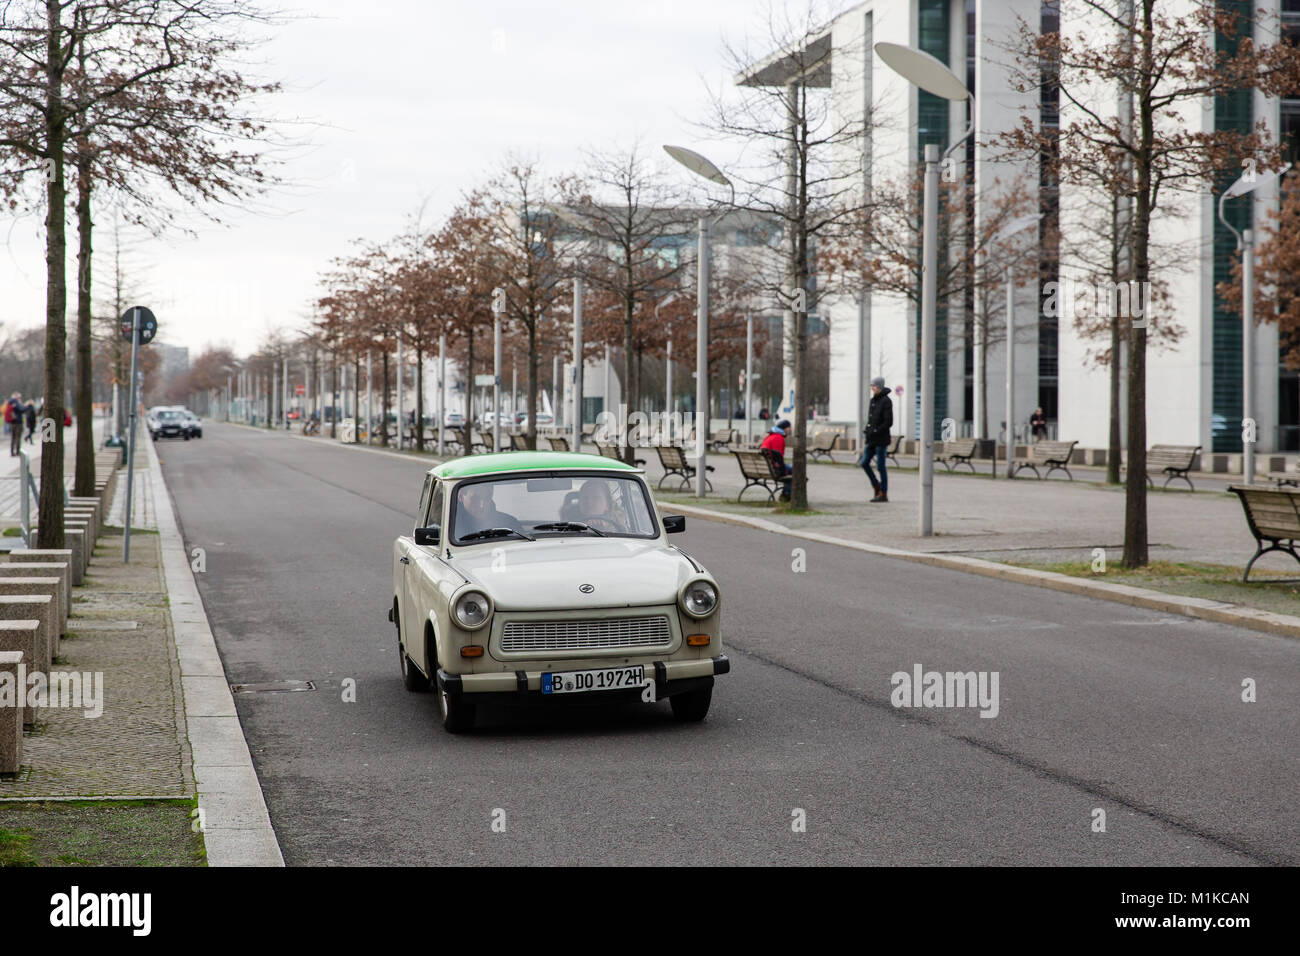 Famous German Car Trabant 601s Deluxe on the streets of Berlin manufactured  during the Communism Era in East Germany Stock Photo - Alamy